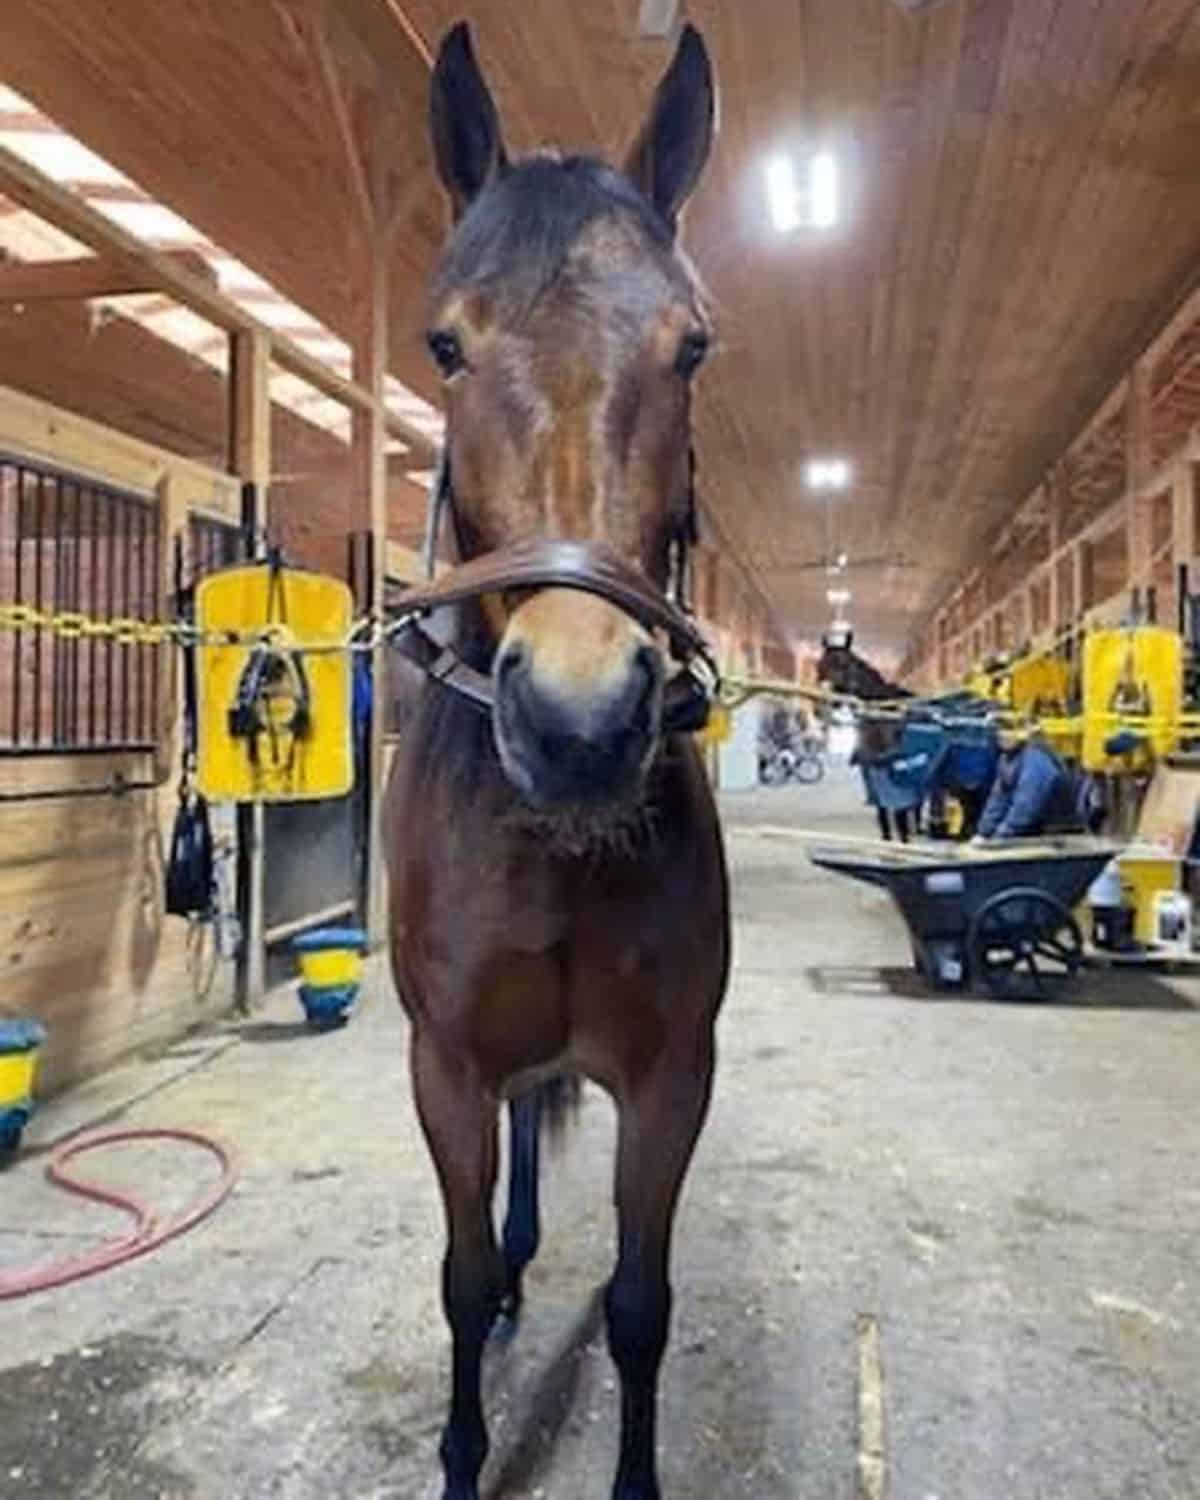 A brown American Standardbred horse in a stable.